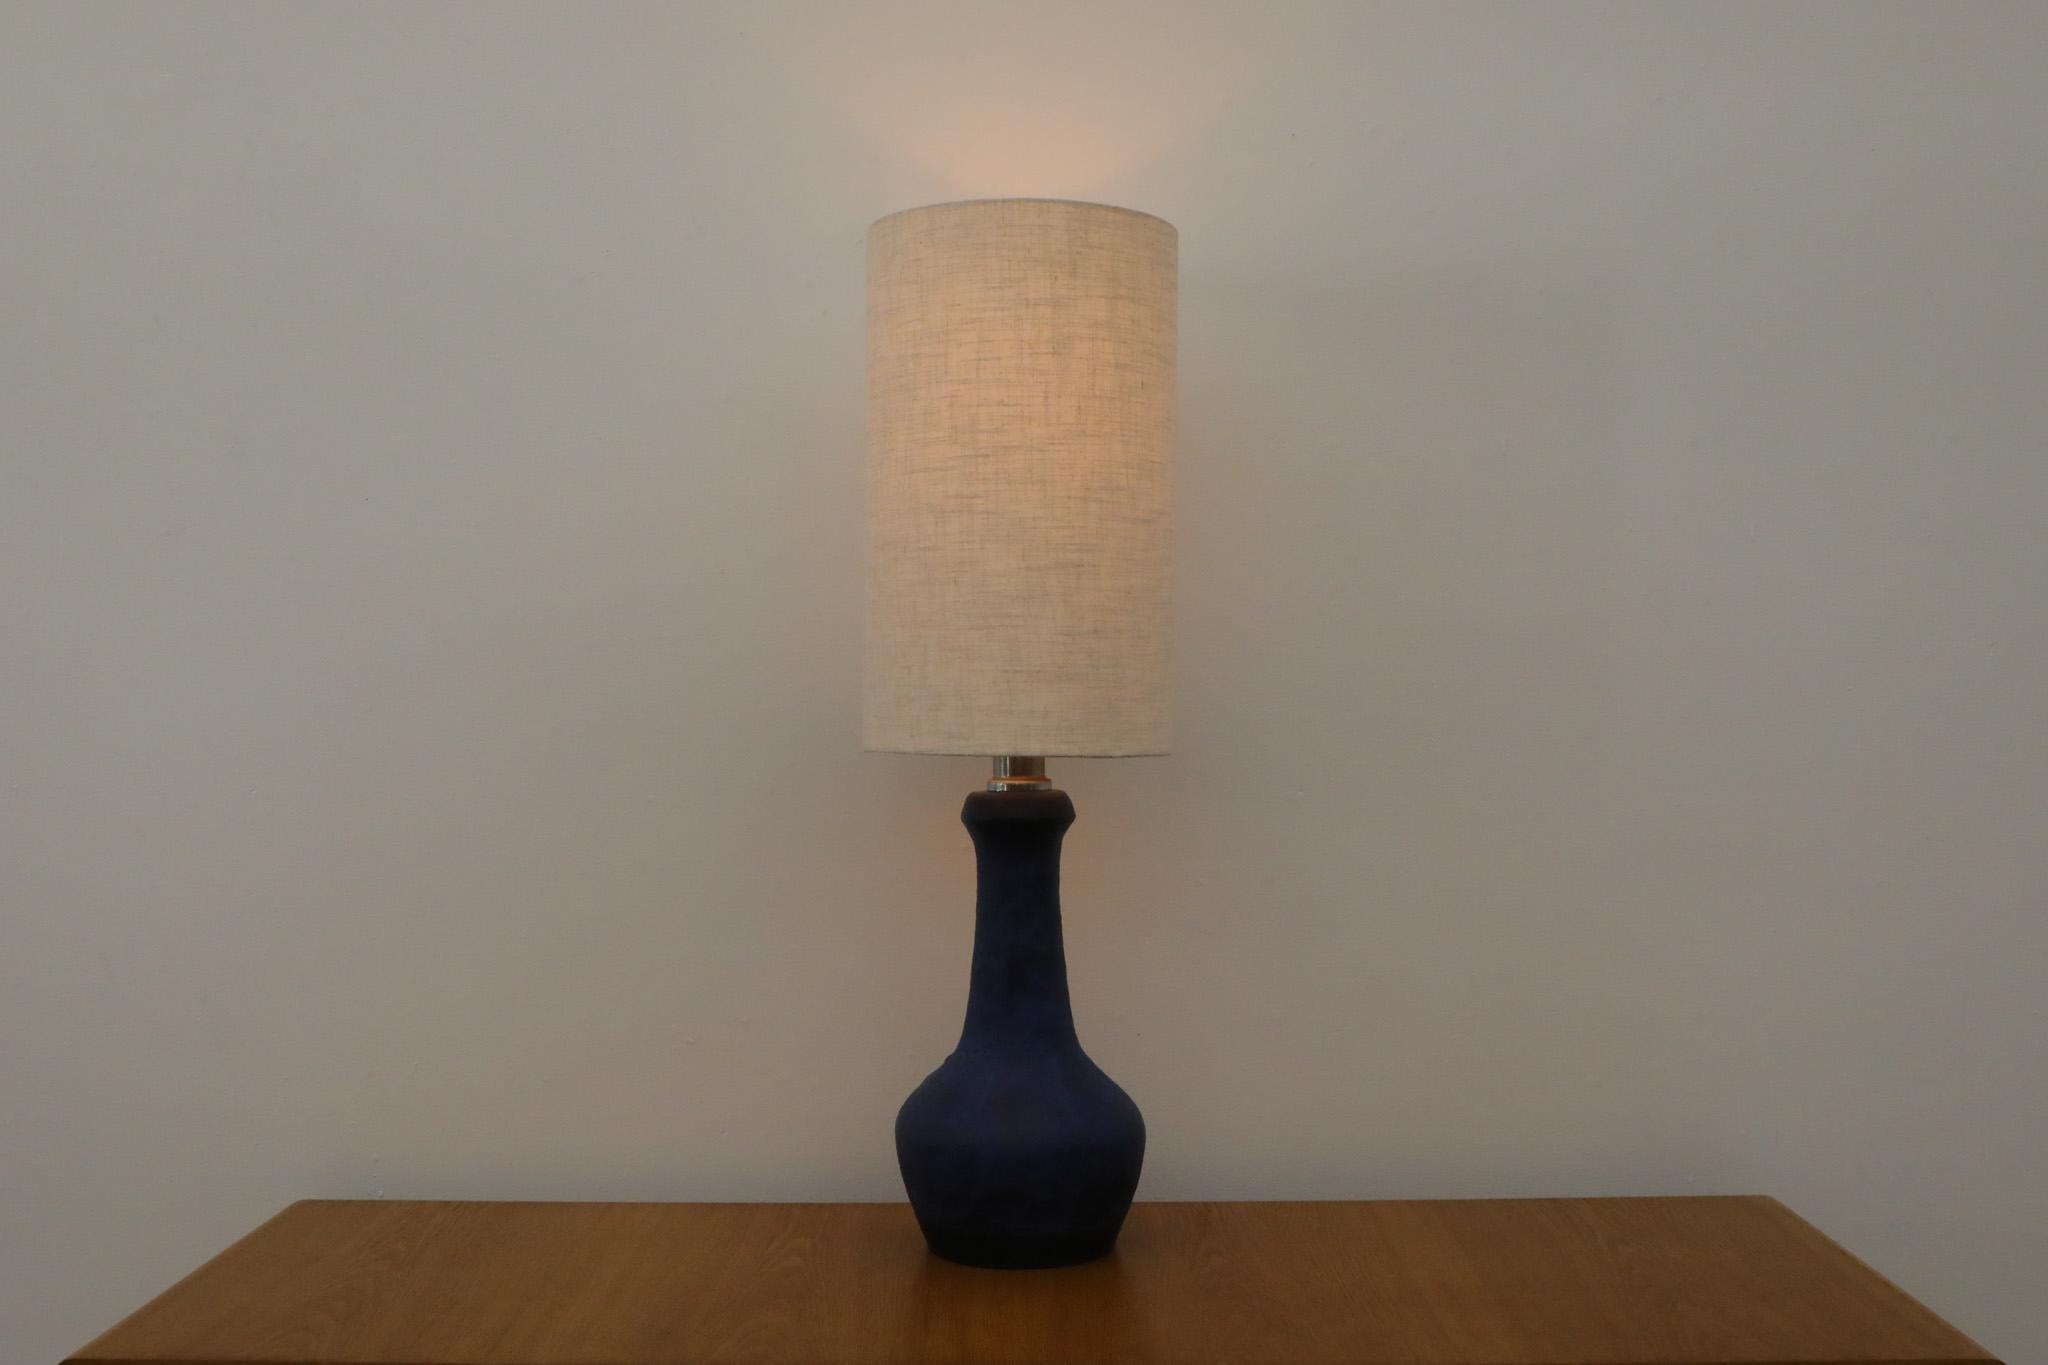 Mid-Century Dutch ceramic table lamp with stunning blue glaze and cylindrical shade. Produced in the 1950s in The Netherlands in a style not too dissimilar to the work of Swedish ceramicist Carl-Harry Stålhane. The light is in good original